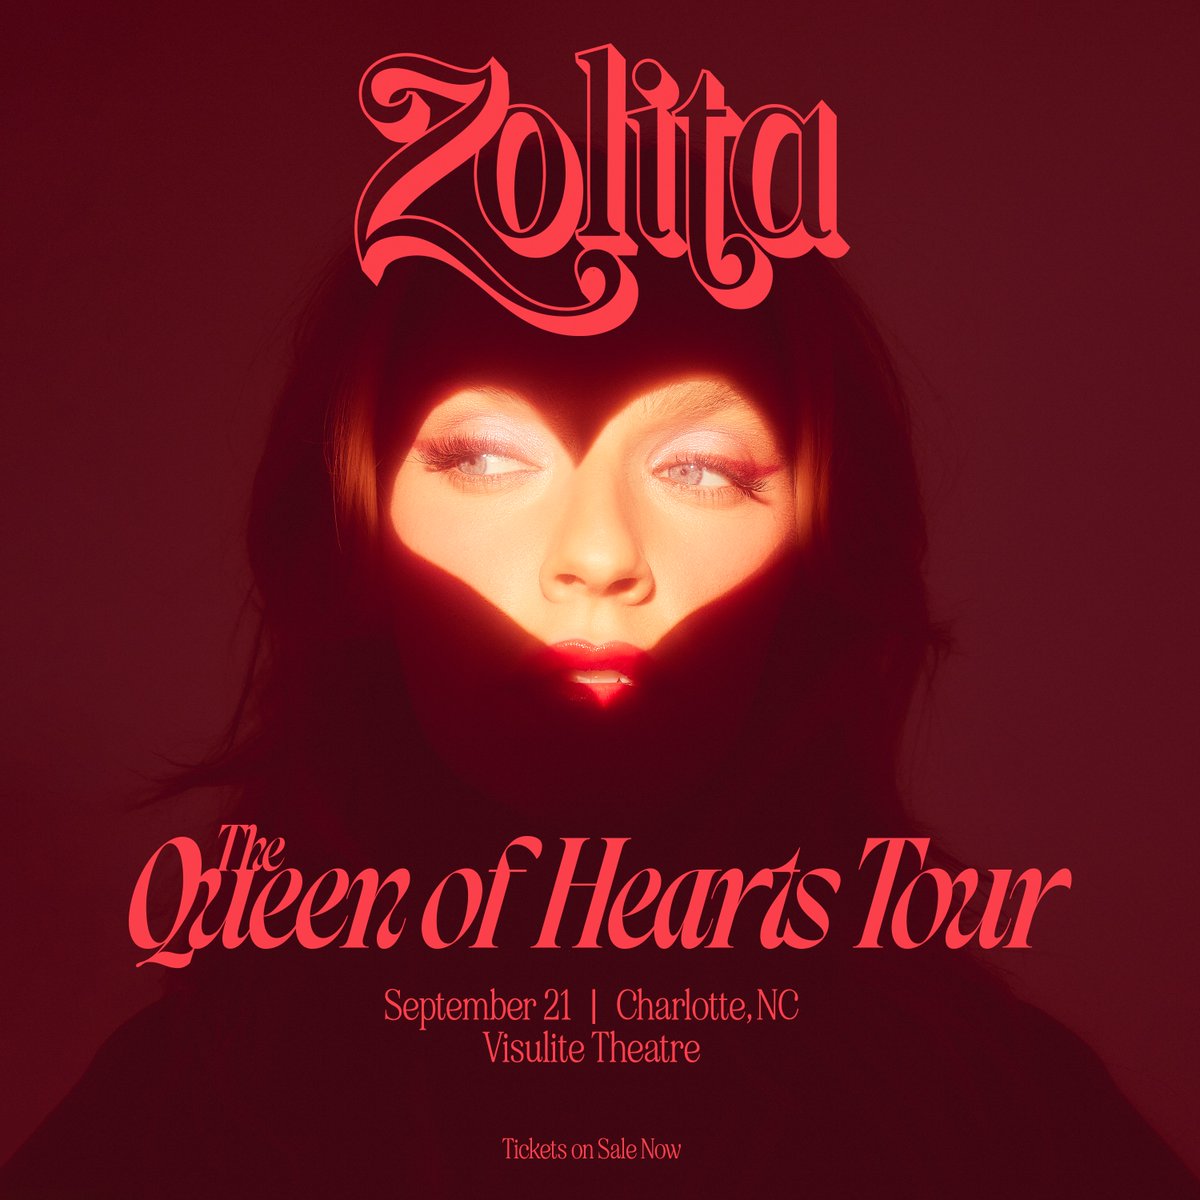 9/21 @zolitaofficial will be performing LIVE at the @VisuliteTheatre in Charlotte, NC! Tickets are ON SALE NOW 👇 visulite.com/shows/details/… Limited VIP are available 👇 visulite.com/shows/details/…